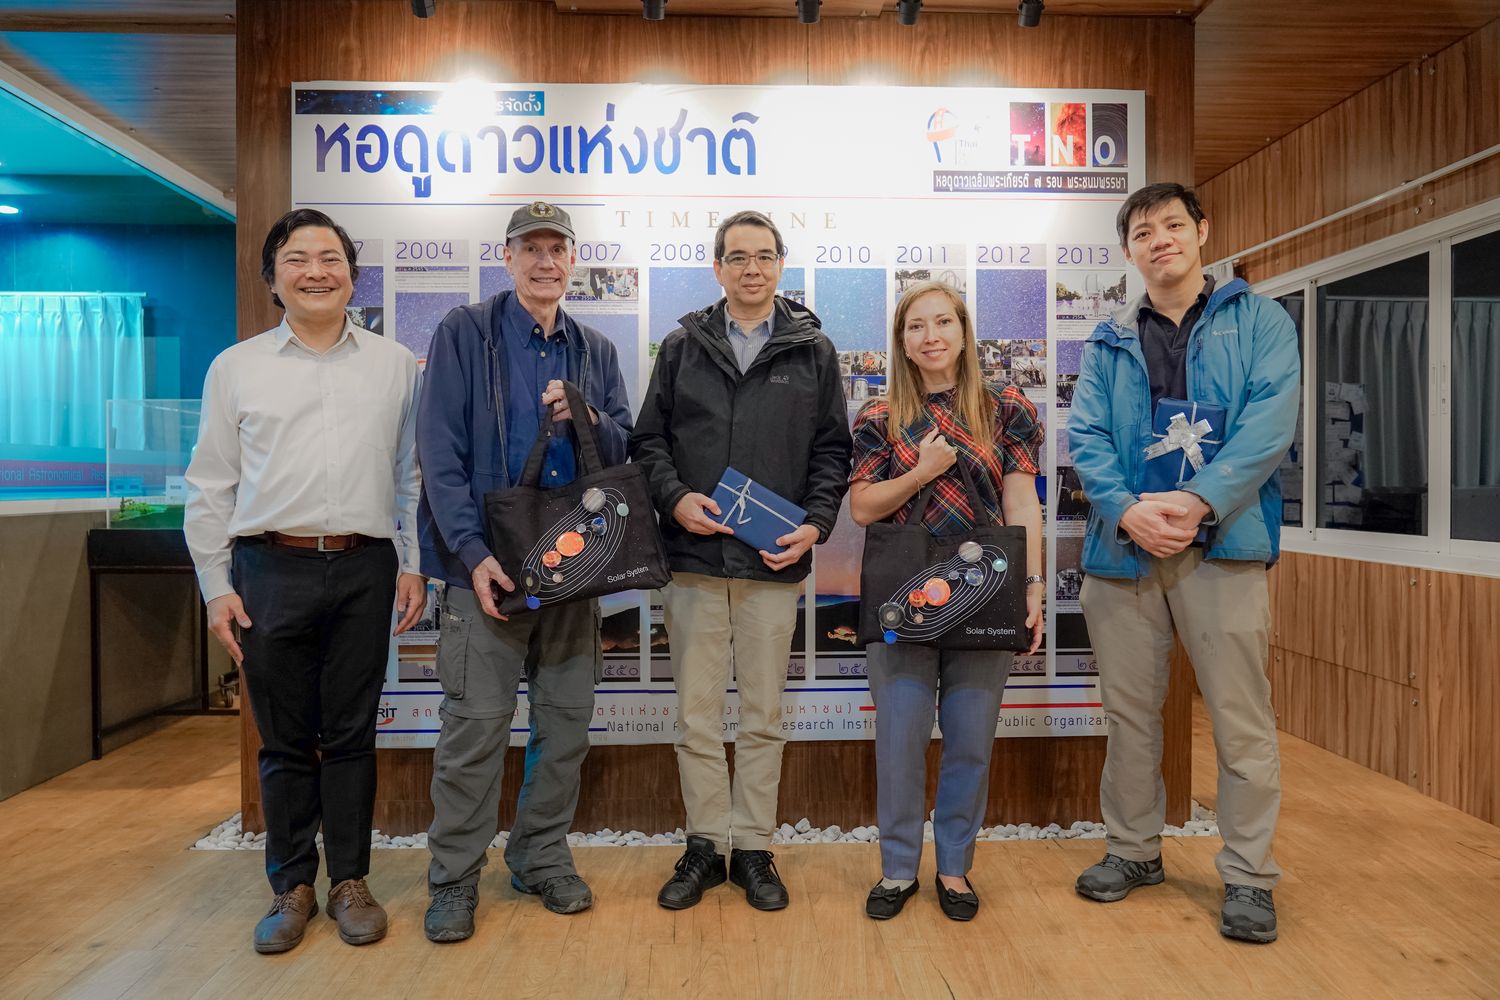 "Astronomy Diplomacy: U.S. Envoys Explore Thai National Observatory in Chiang Mai"